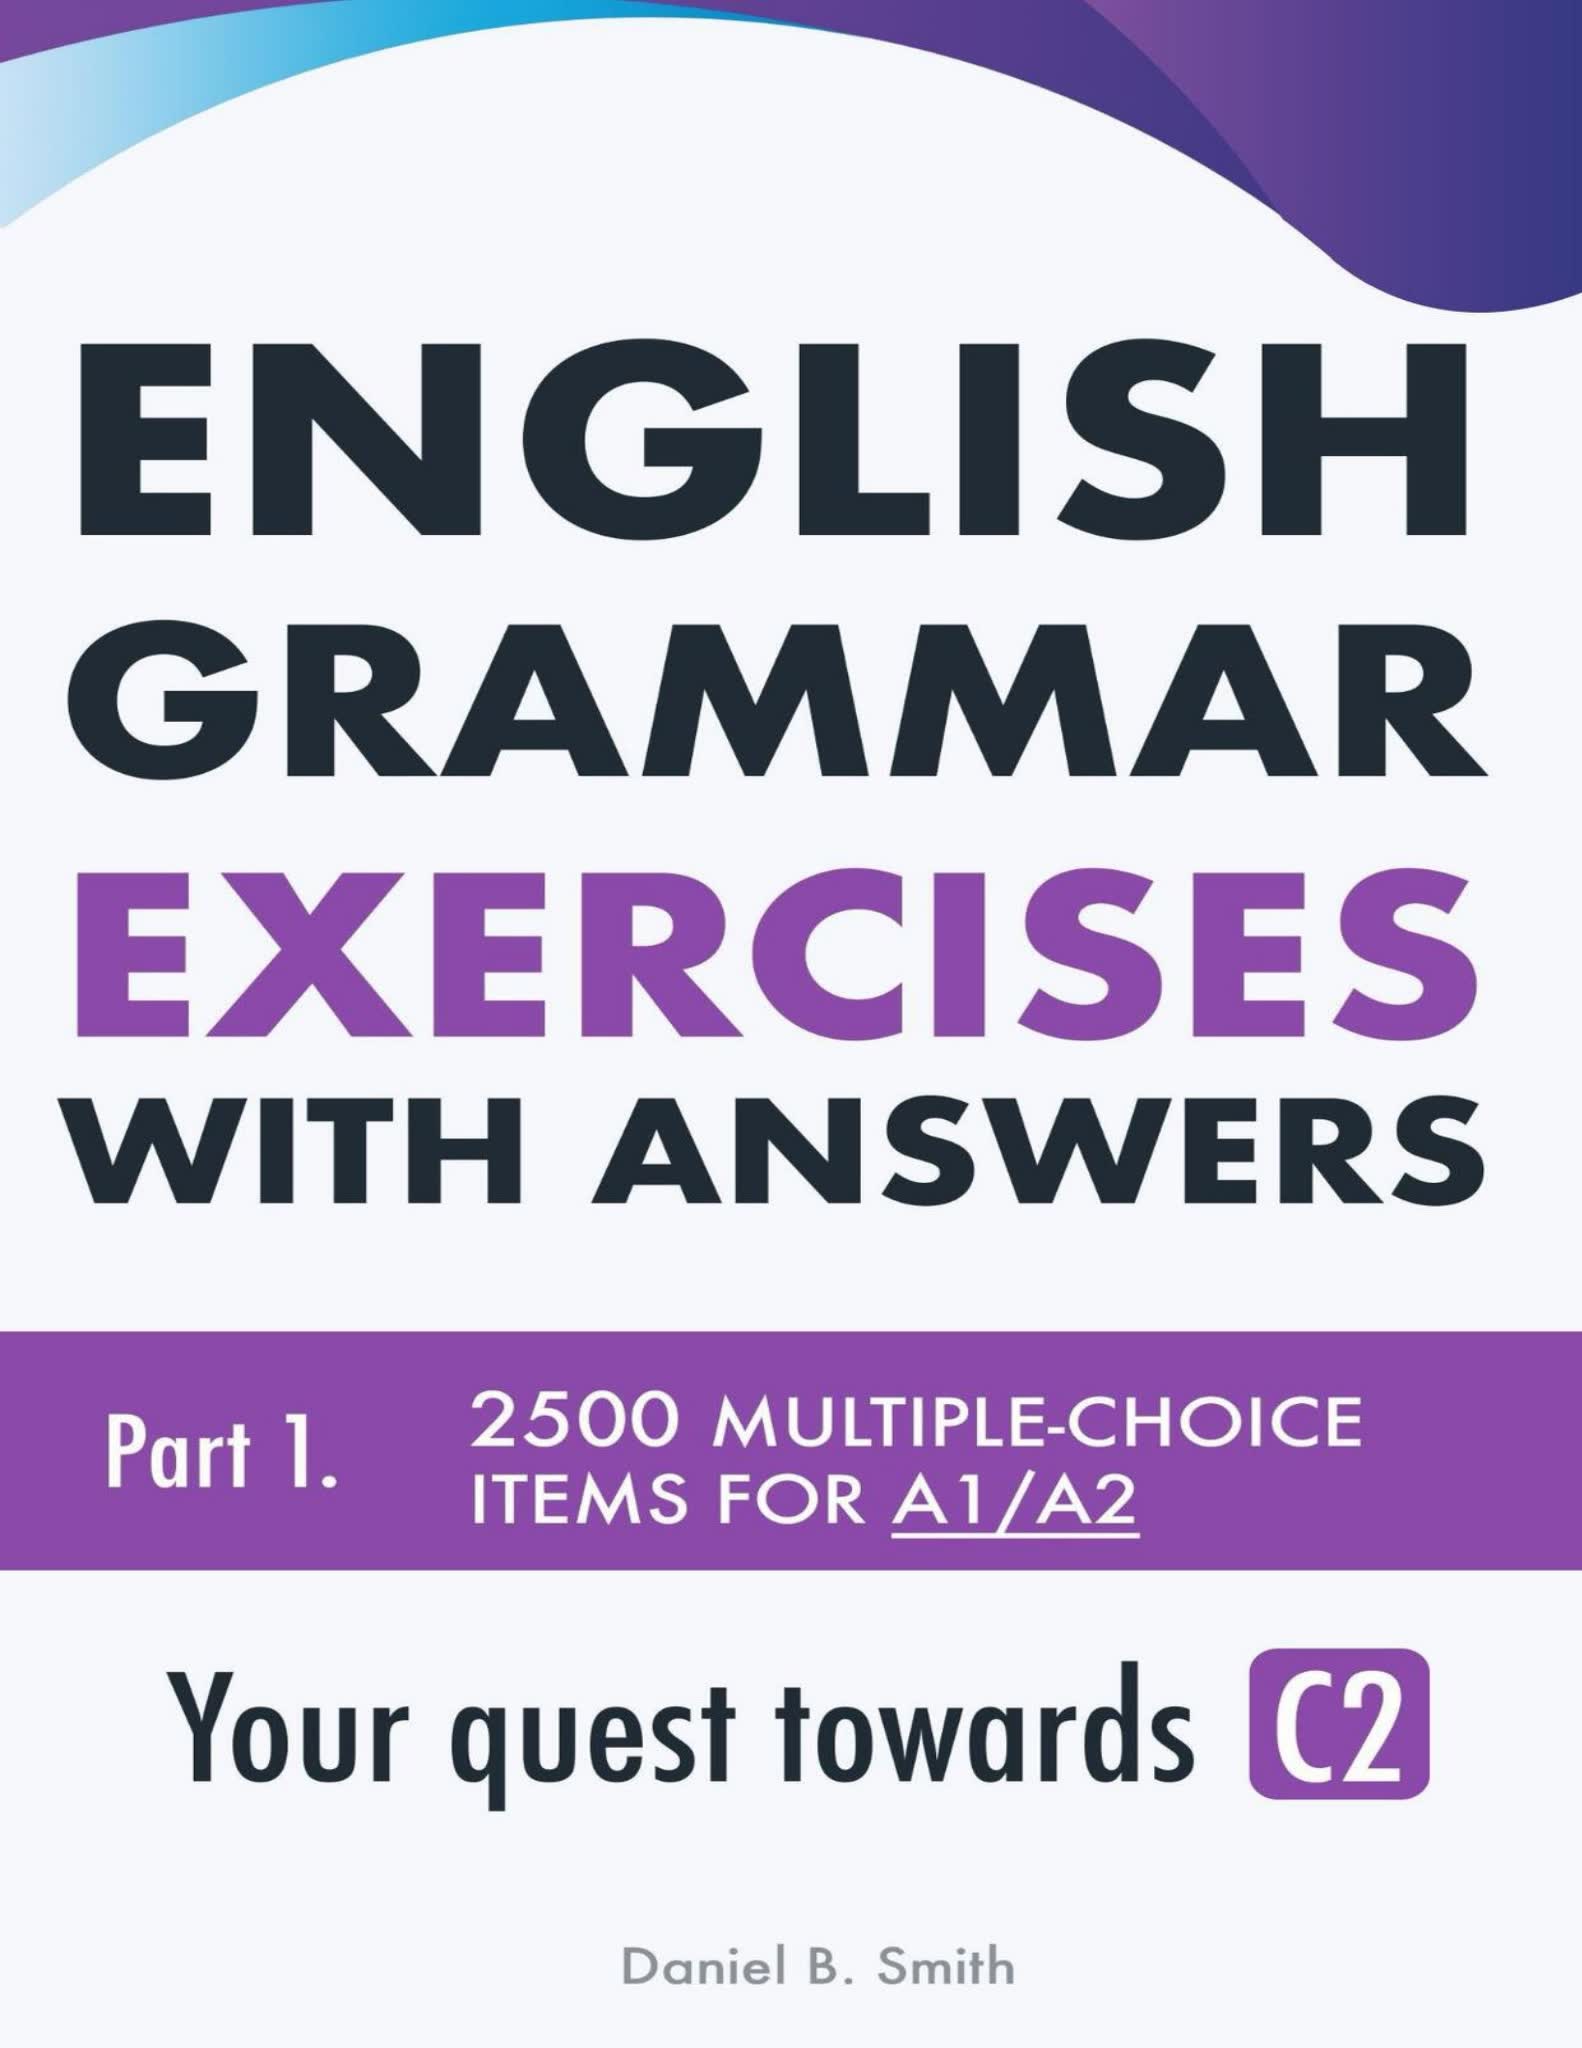 English-Grammar-Exercises-with-Answers